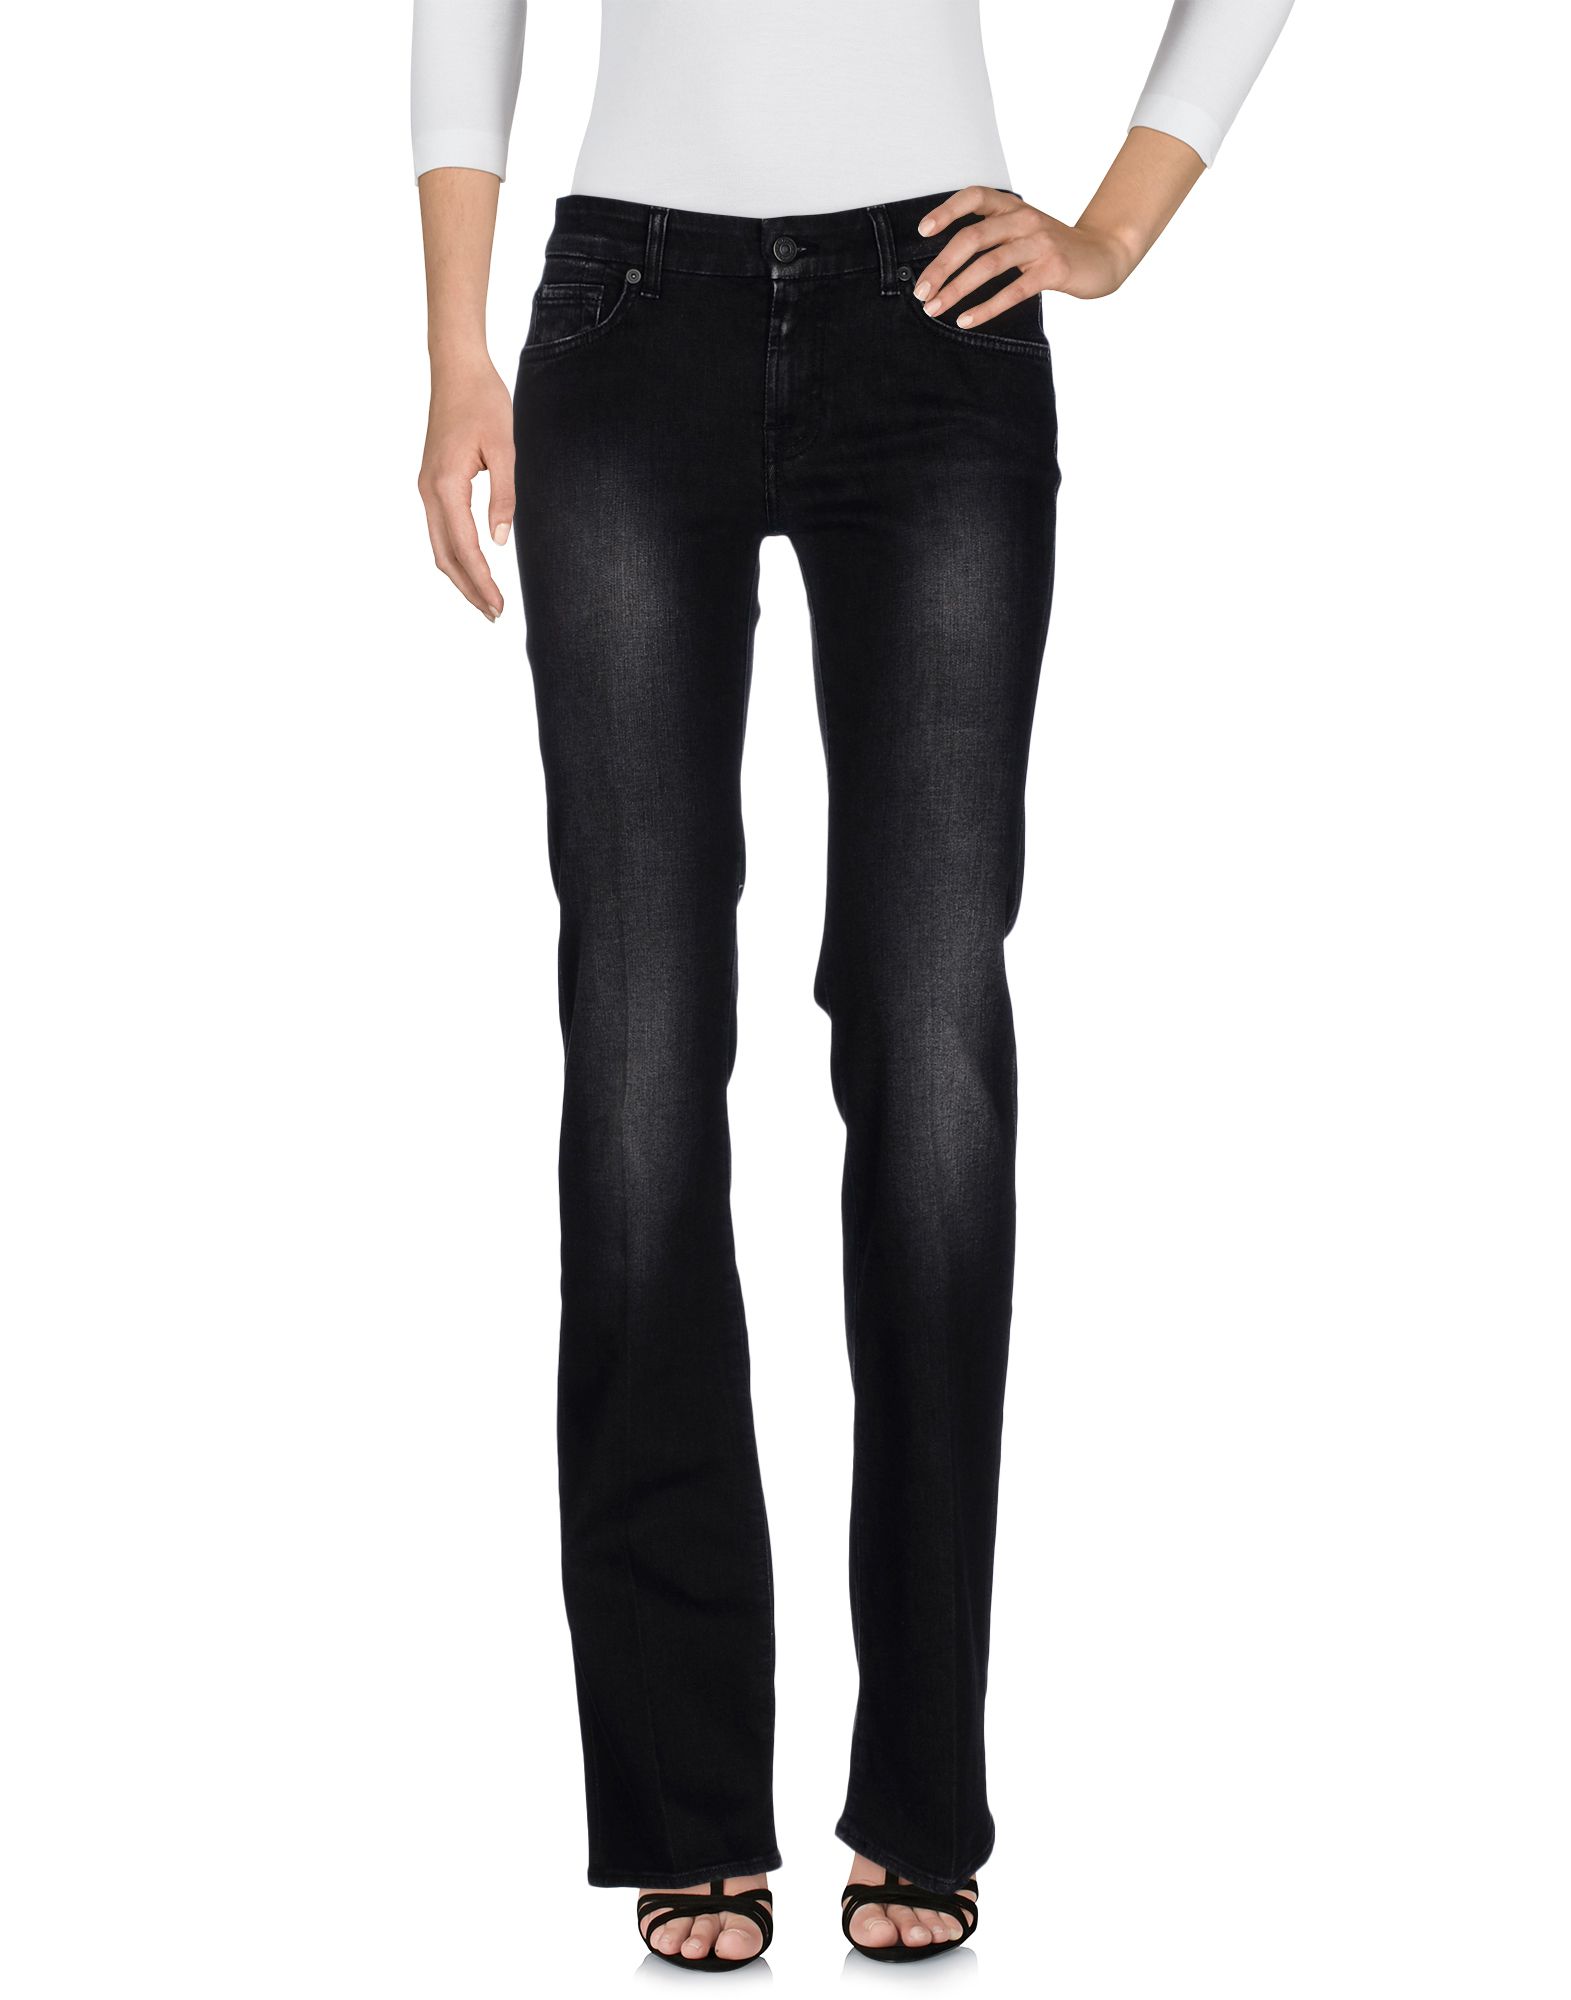 7 FOR ALL MANKIND Denim pants,42607213CF 5